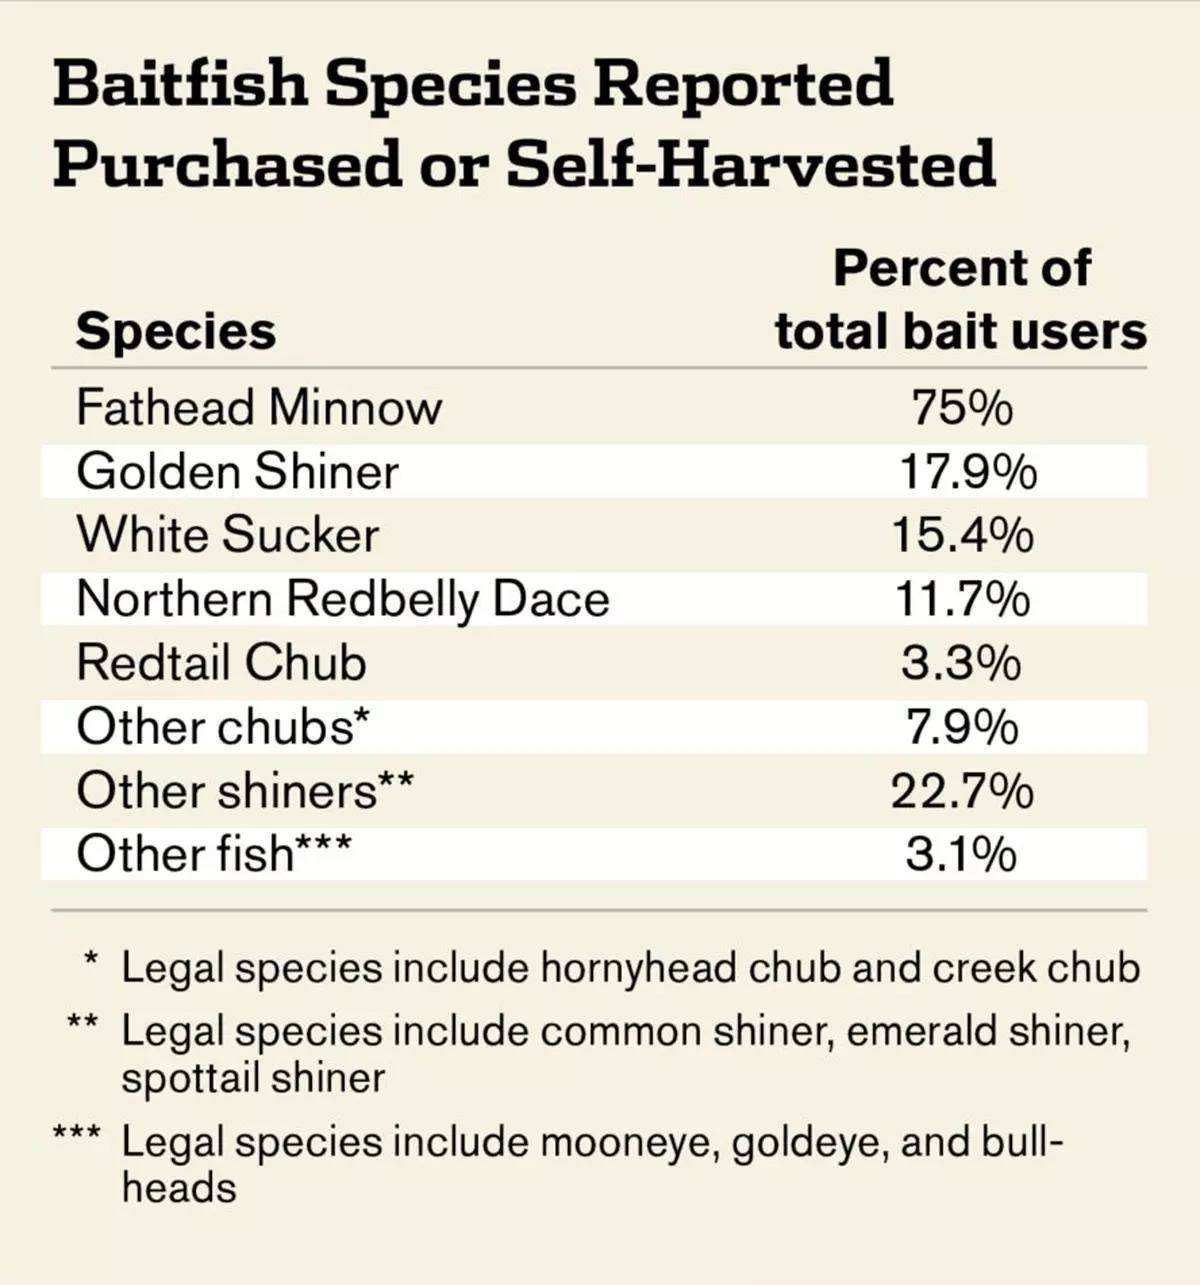 A chart of baitfish species reported purchased or self-harvested showing that fathead minnows are the most common baitfish used by anglers.